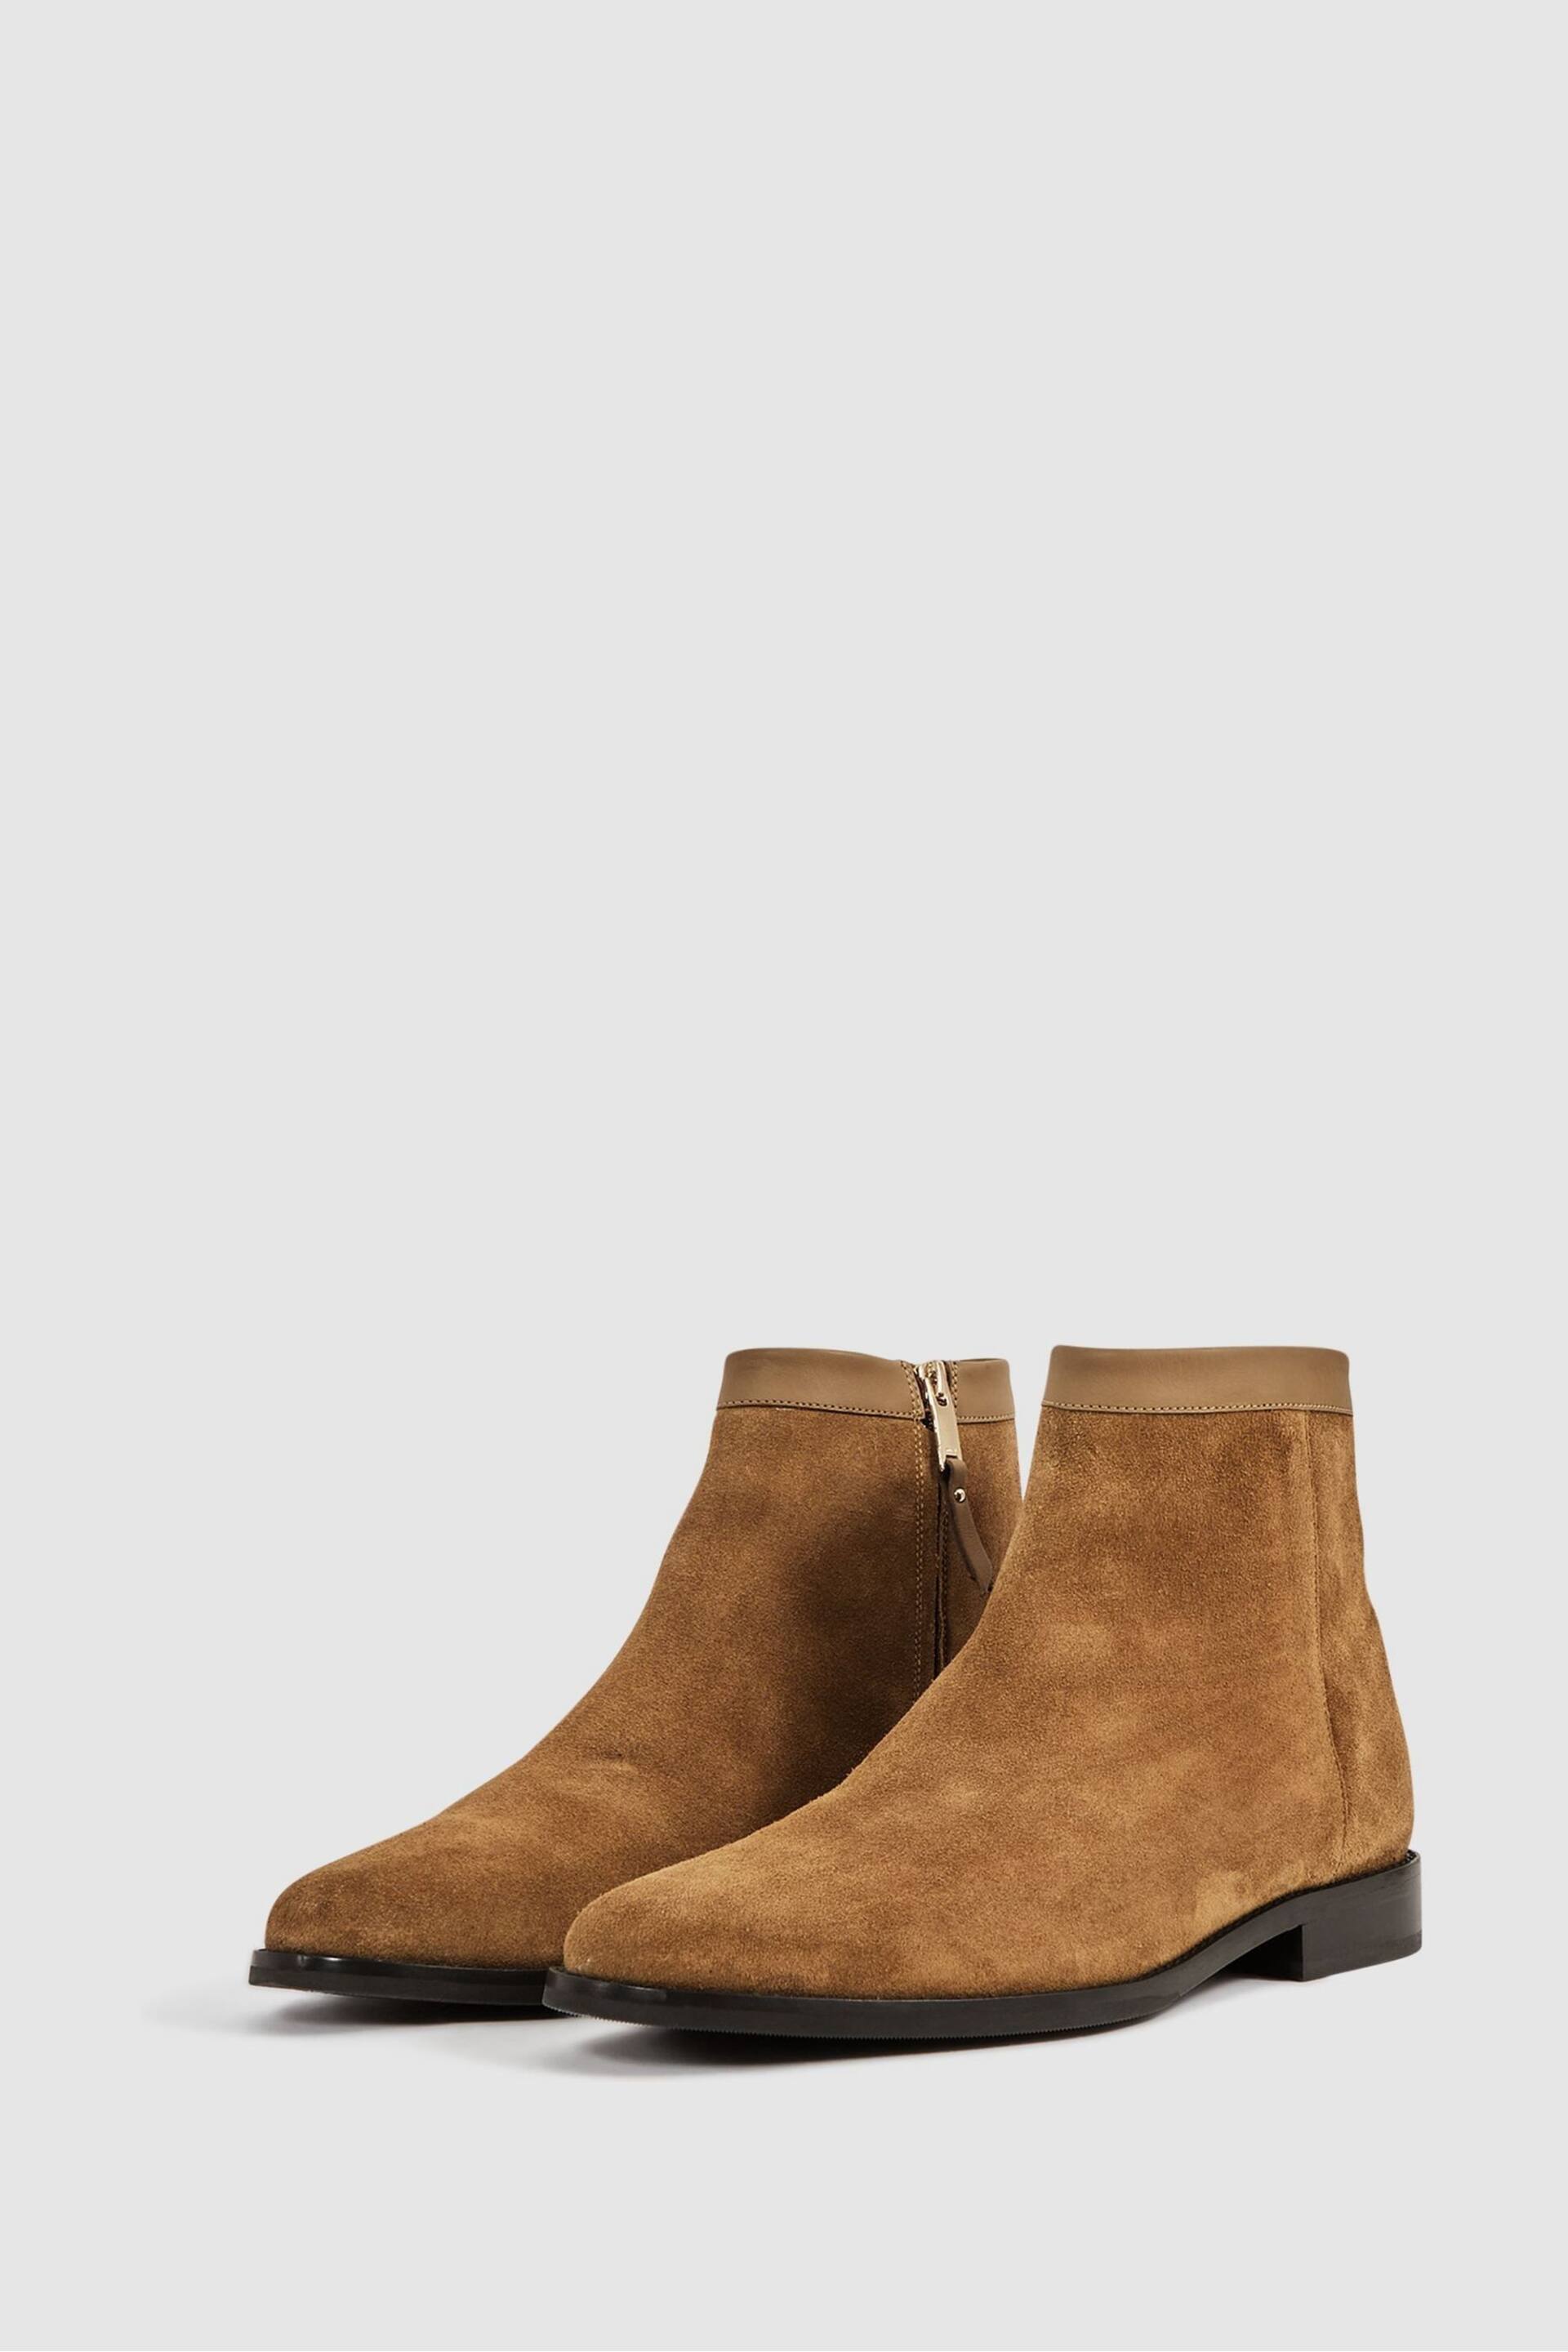 Reiss Stone Clay Suede Zip-Through Boots - Image 3 of 5